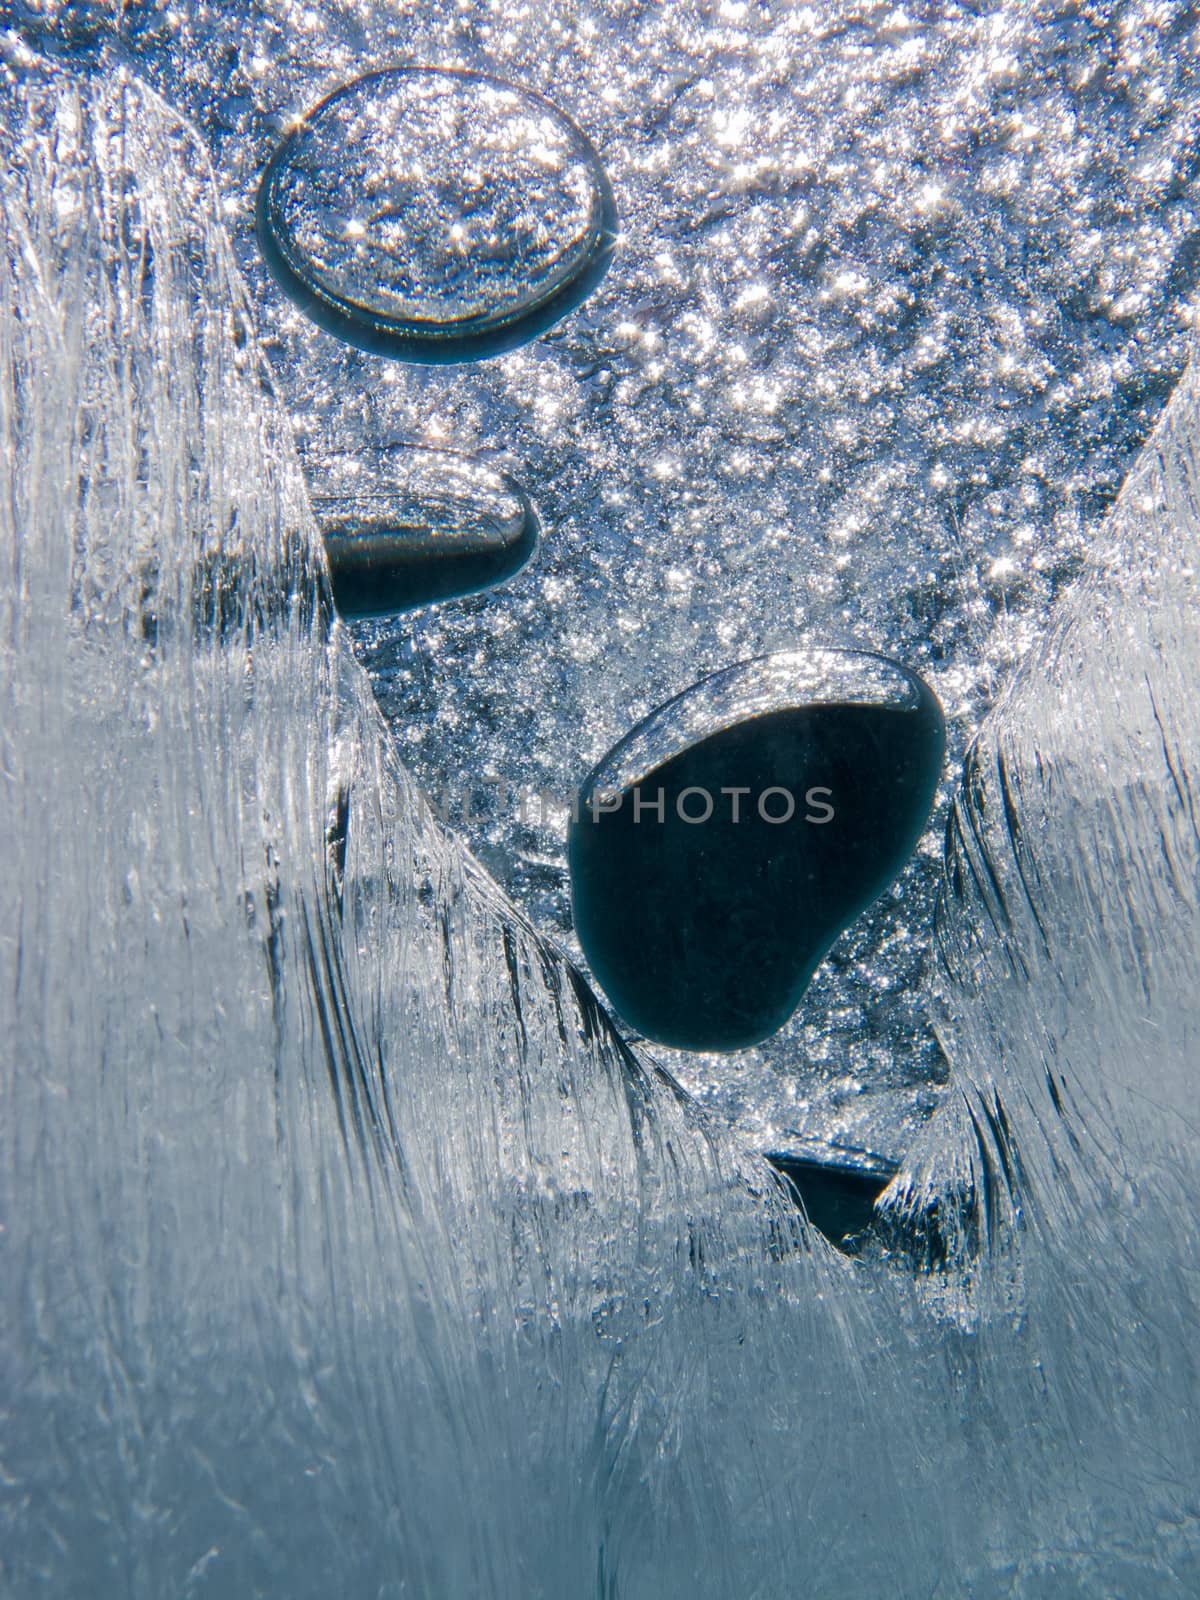 Air bubbles trapped under frozen ice surface by PiLens